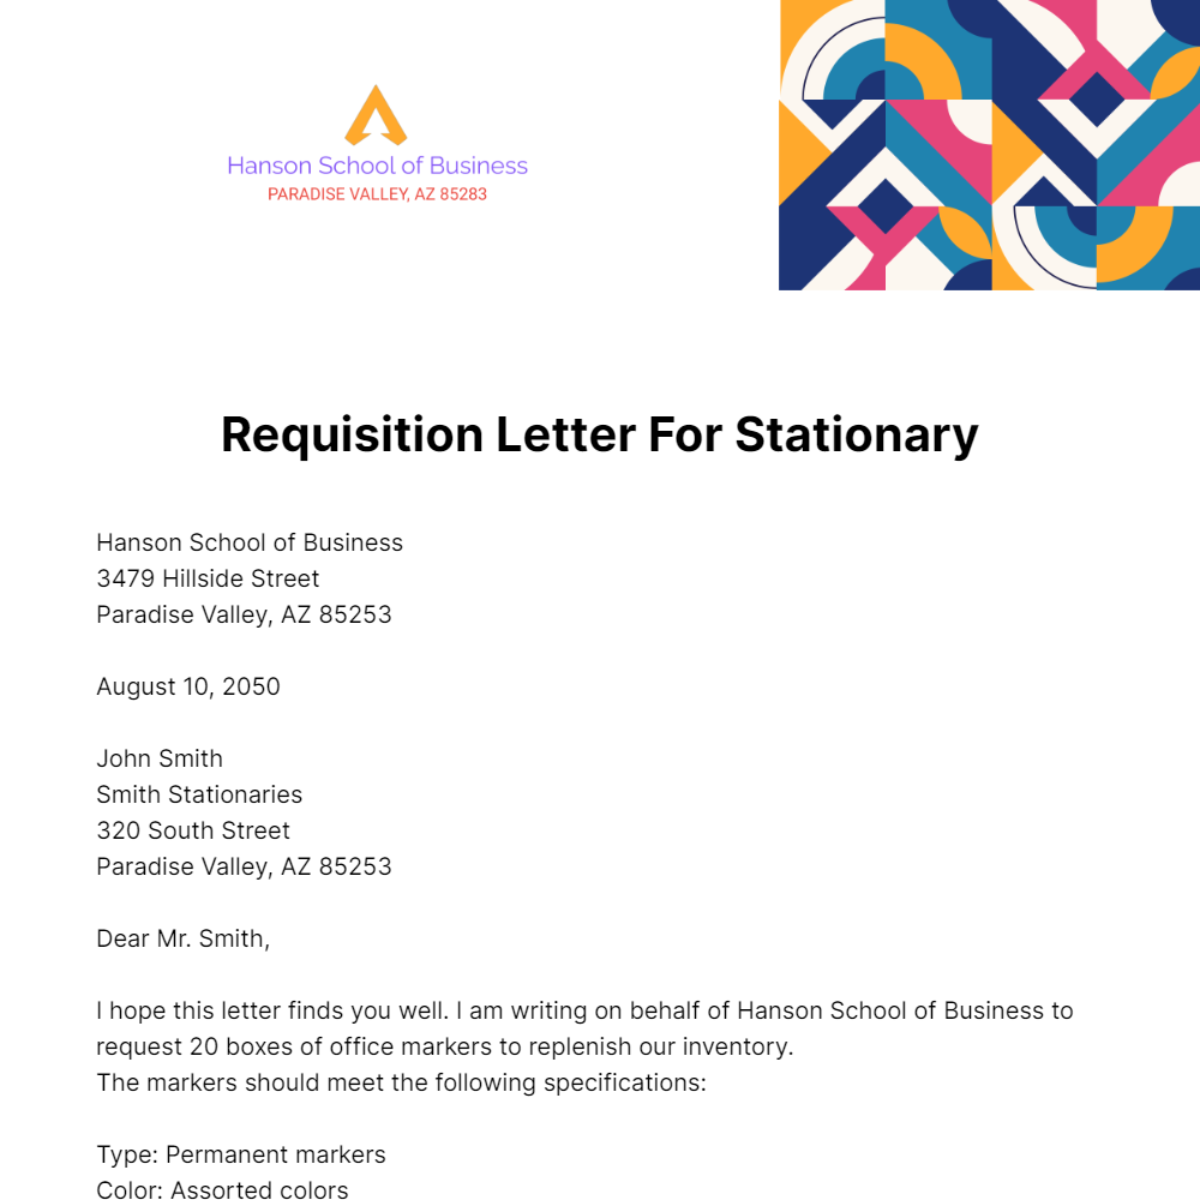 Requisition Letter for Stationery Template